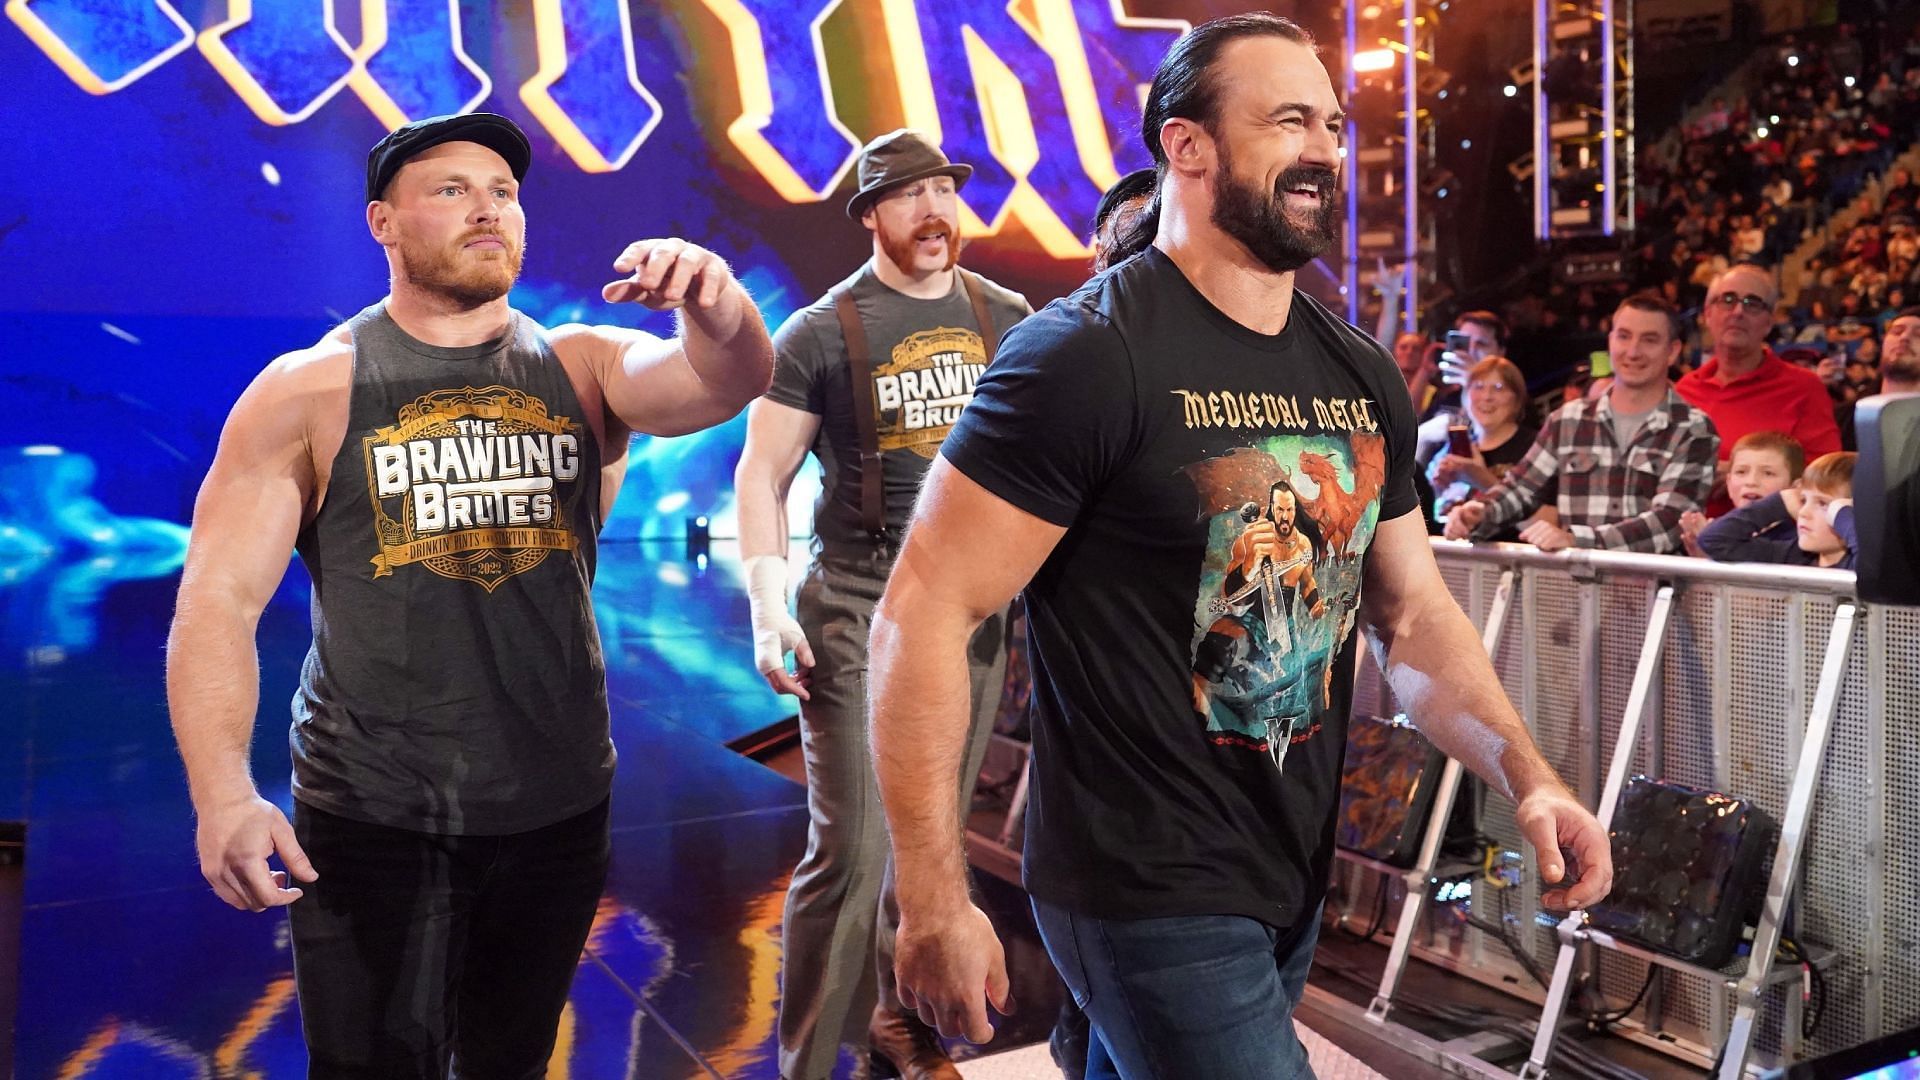 Drew McIntyre and The Brawling Brutes